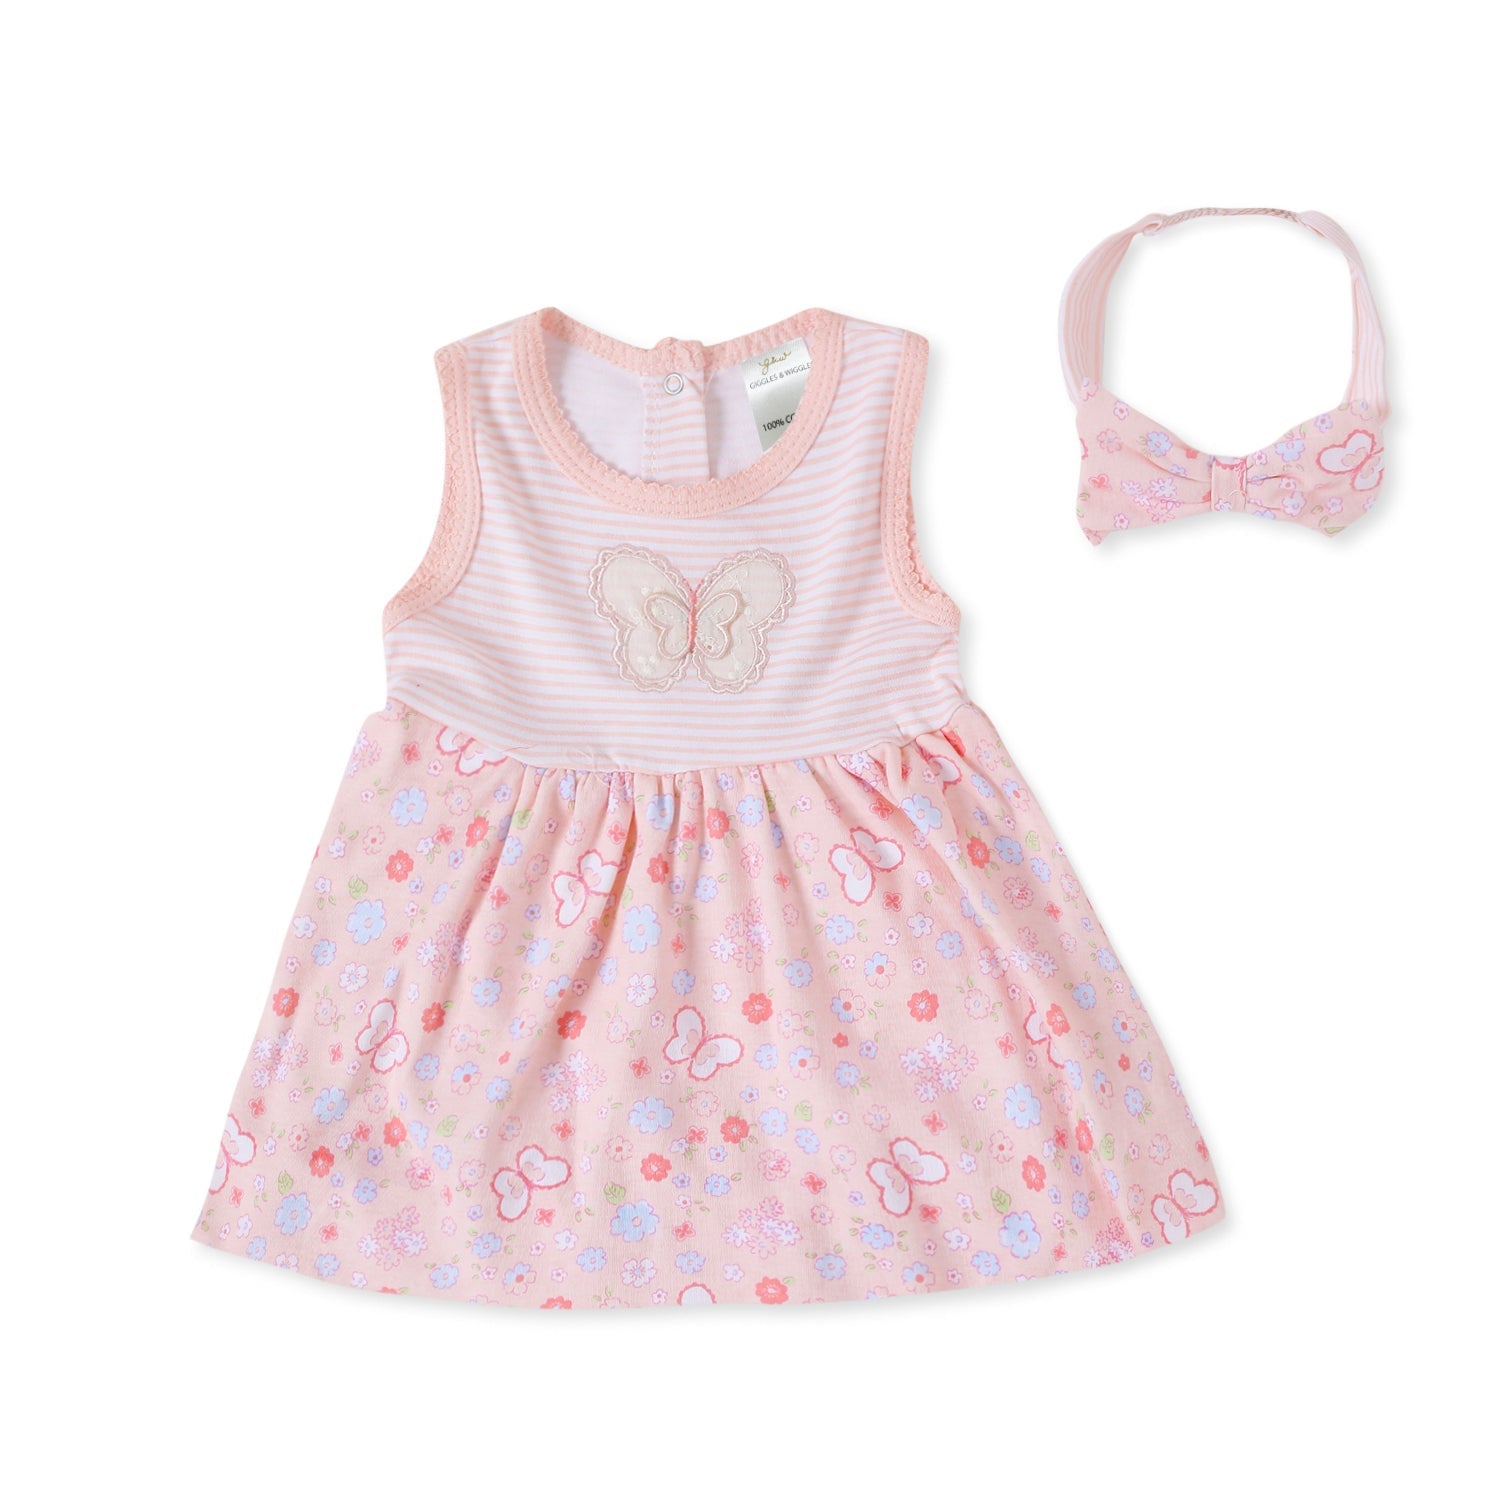 Giggles & Wiggles Little Beauty Blossom Pink Floral Dress With Accessories